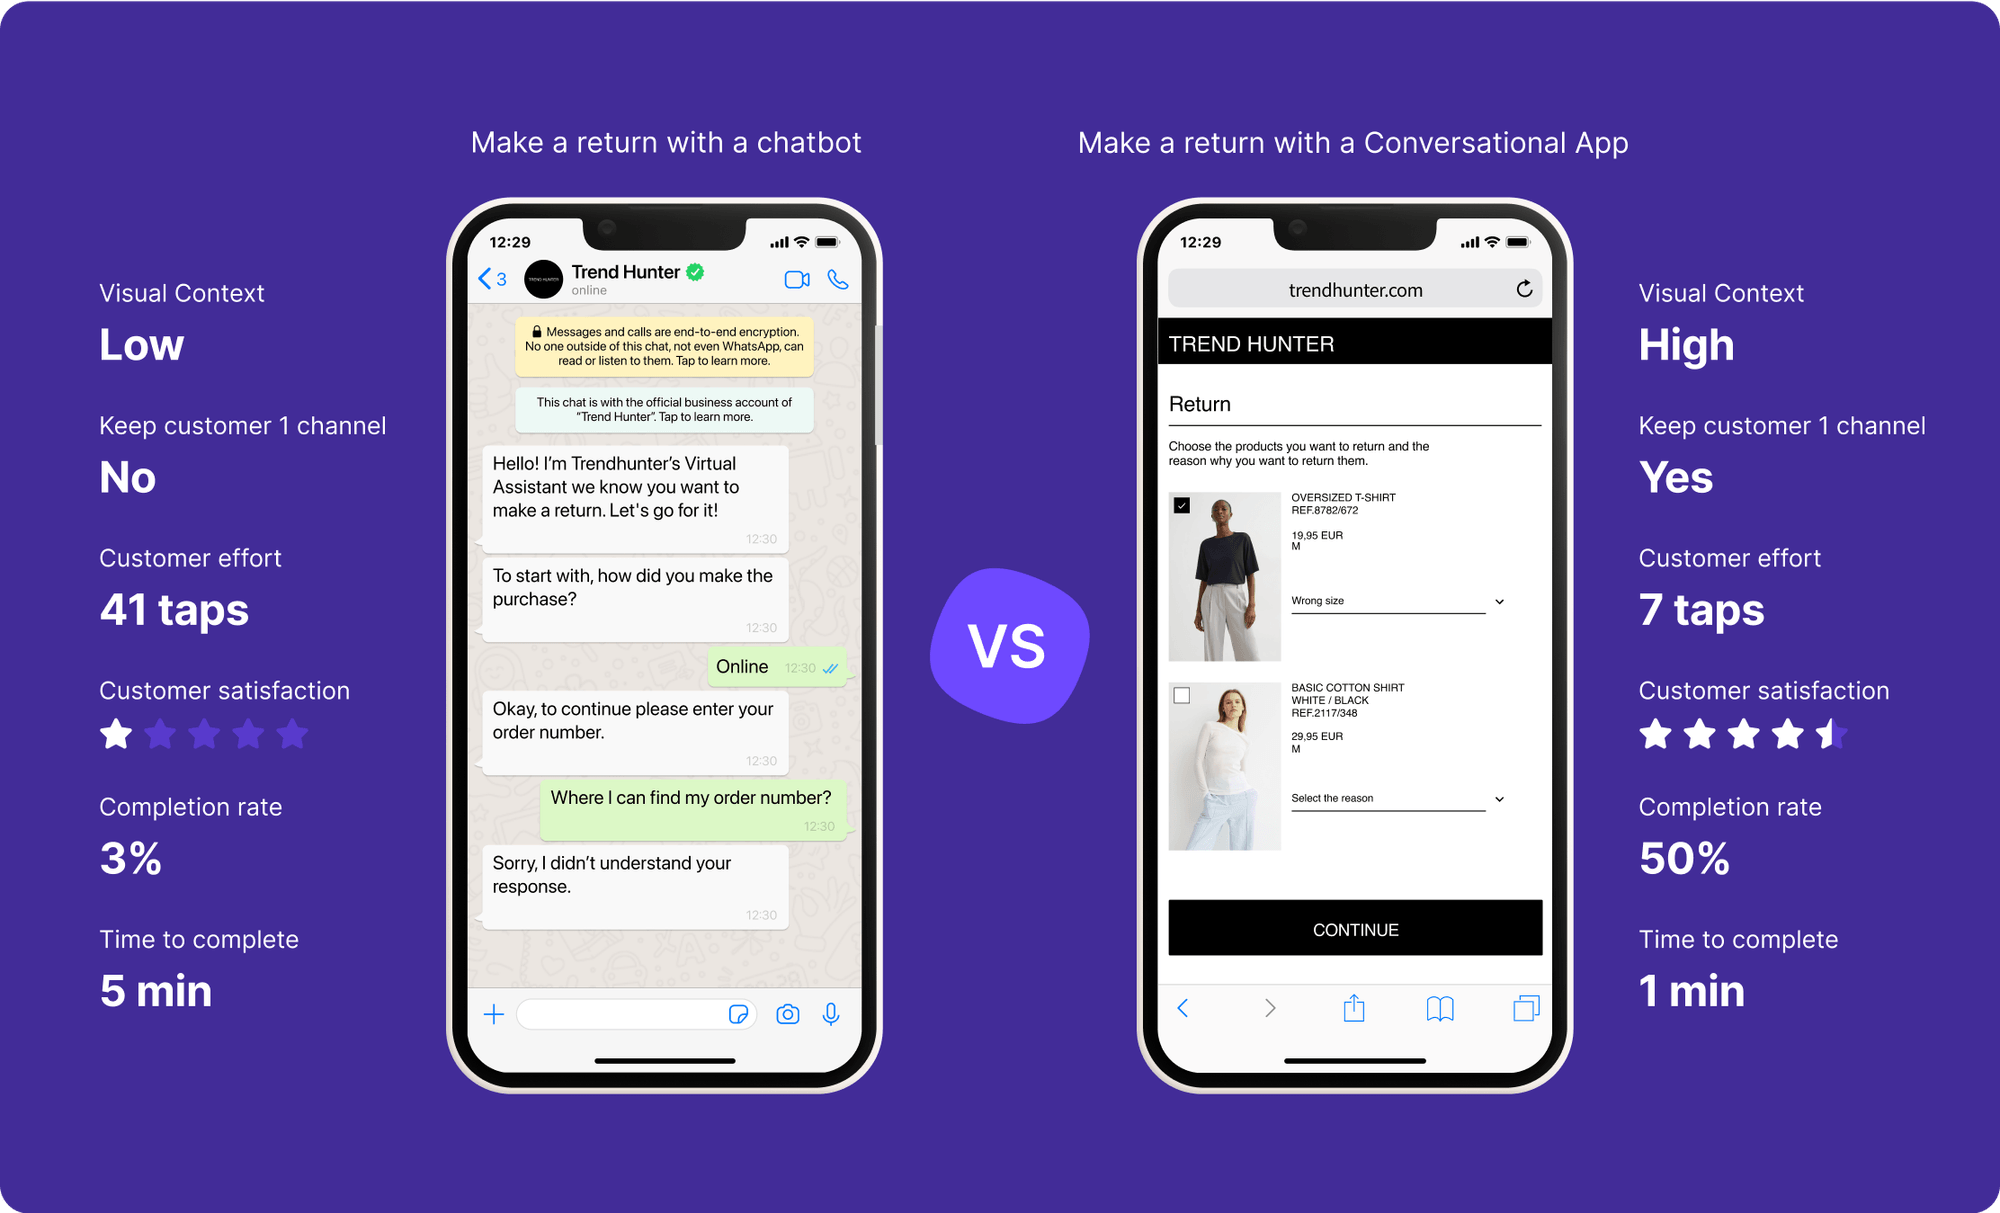 Visual representation of how much better is making a return on an ecommerce conversational app versus a simple text chatbot with Hubtype rich UX design and innovative technology